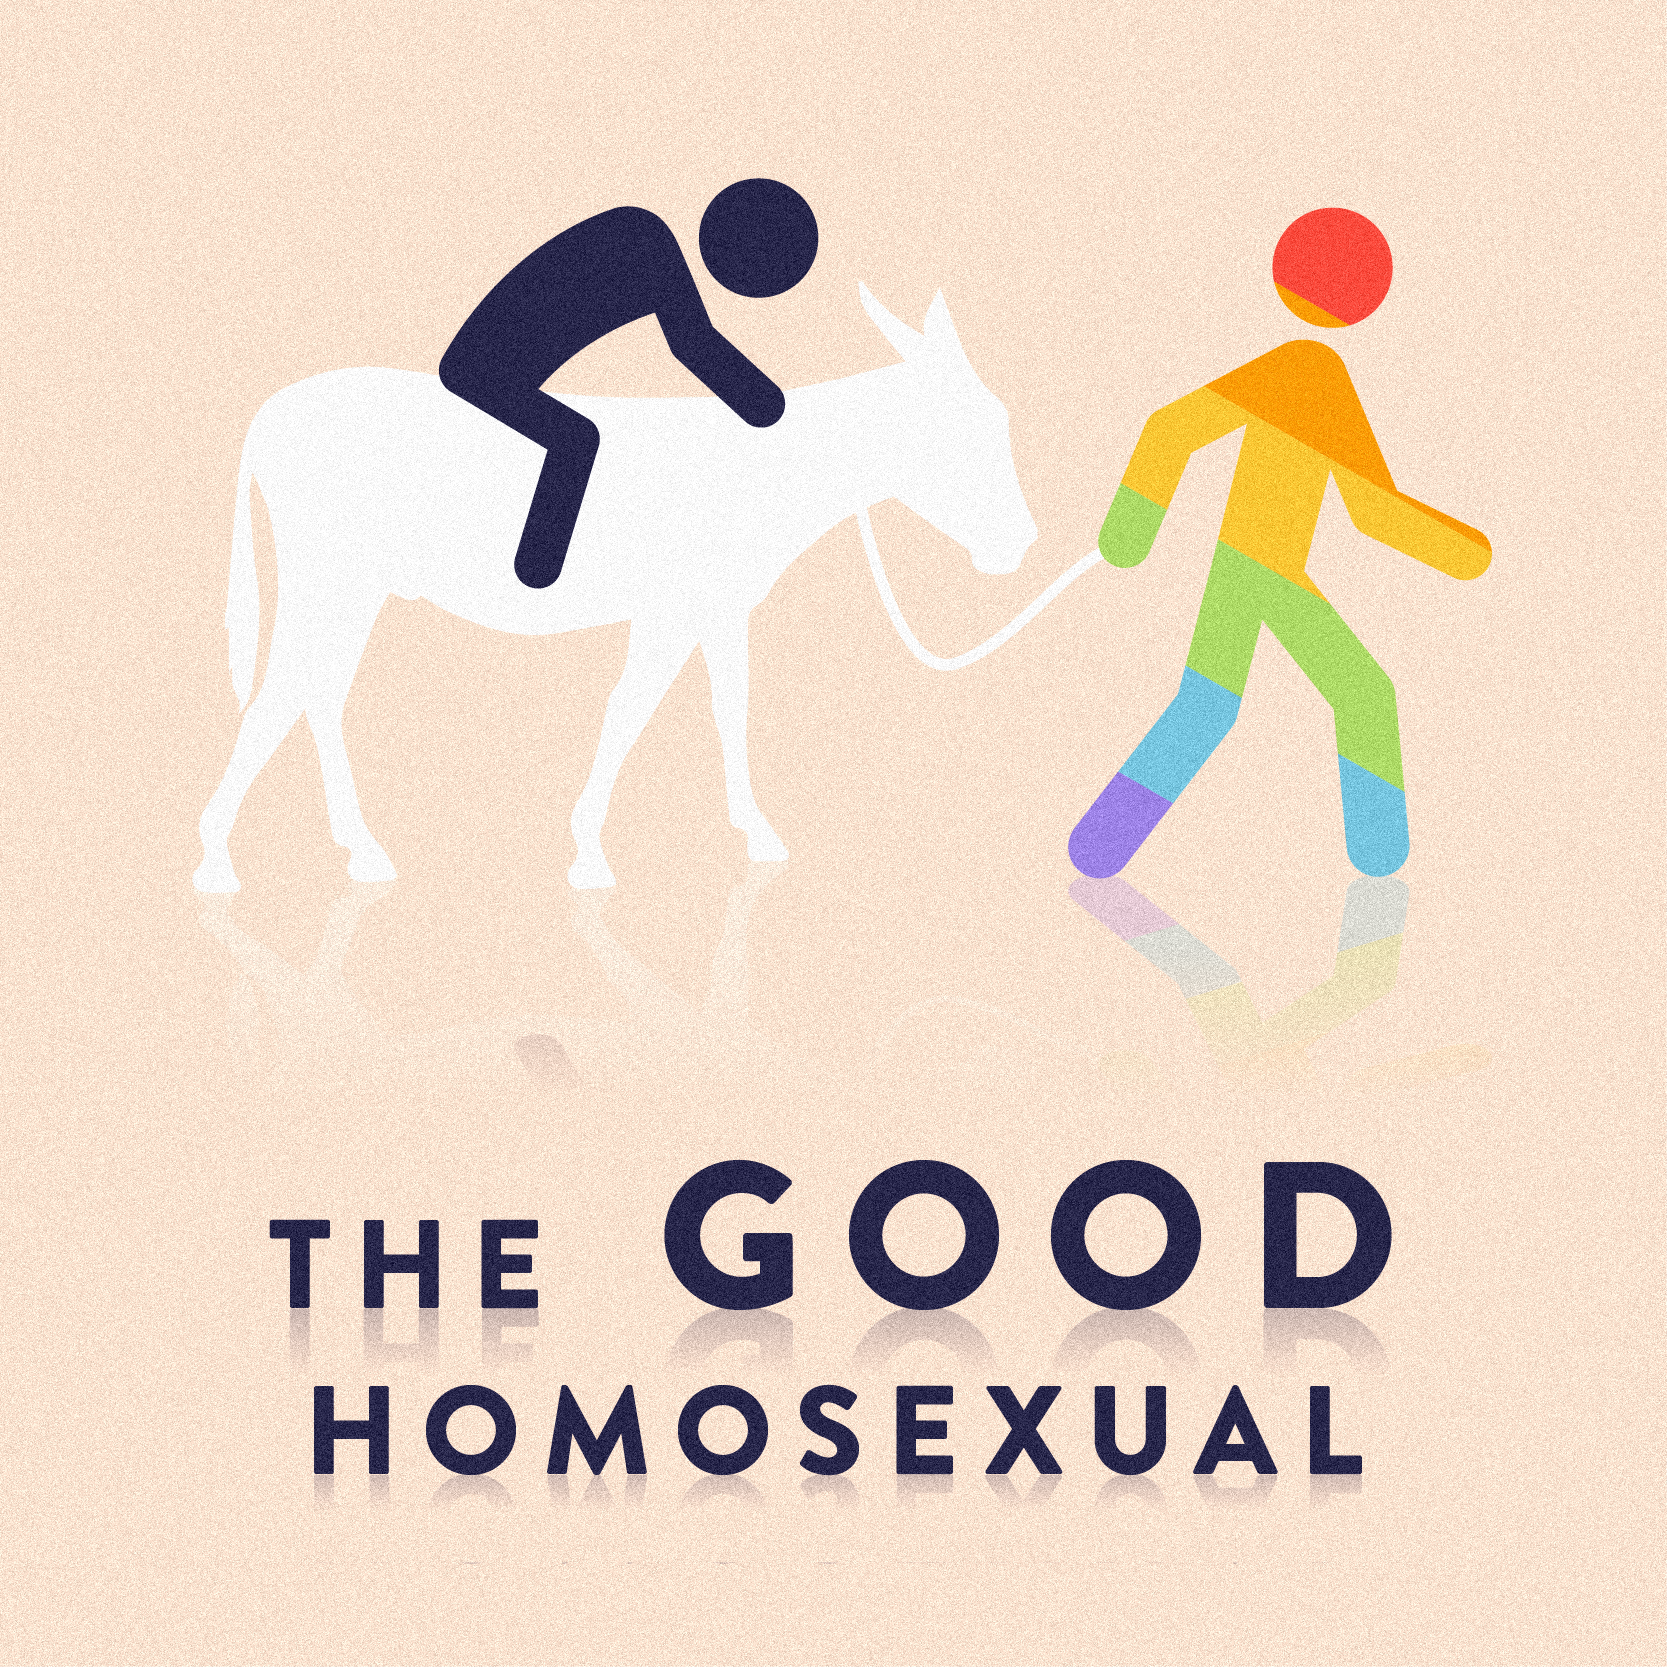 The Good Homosexual